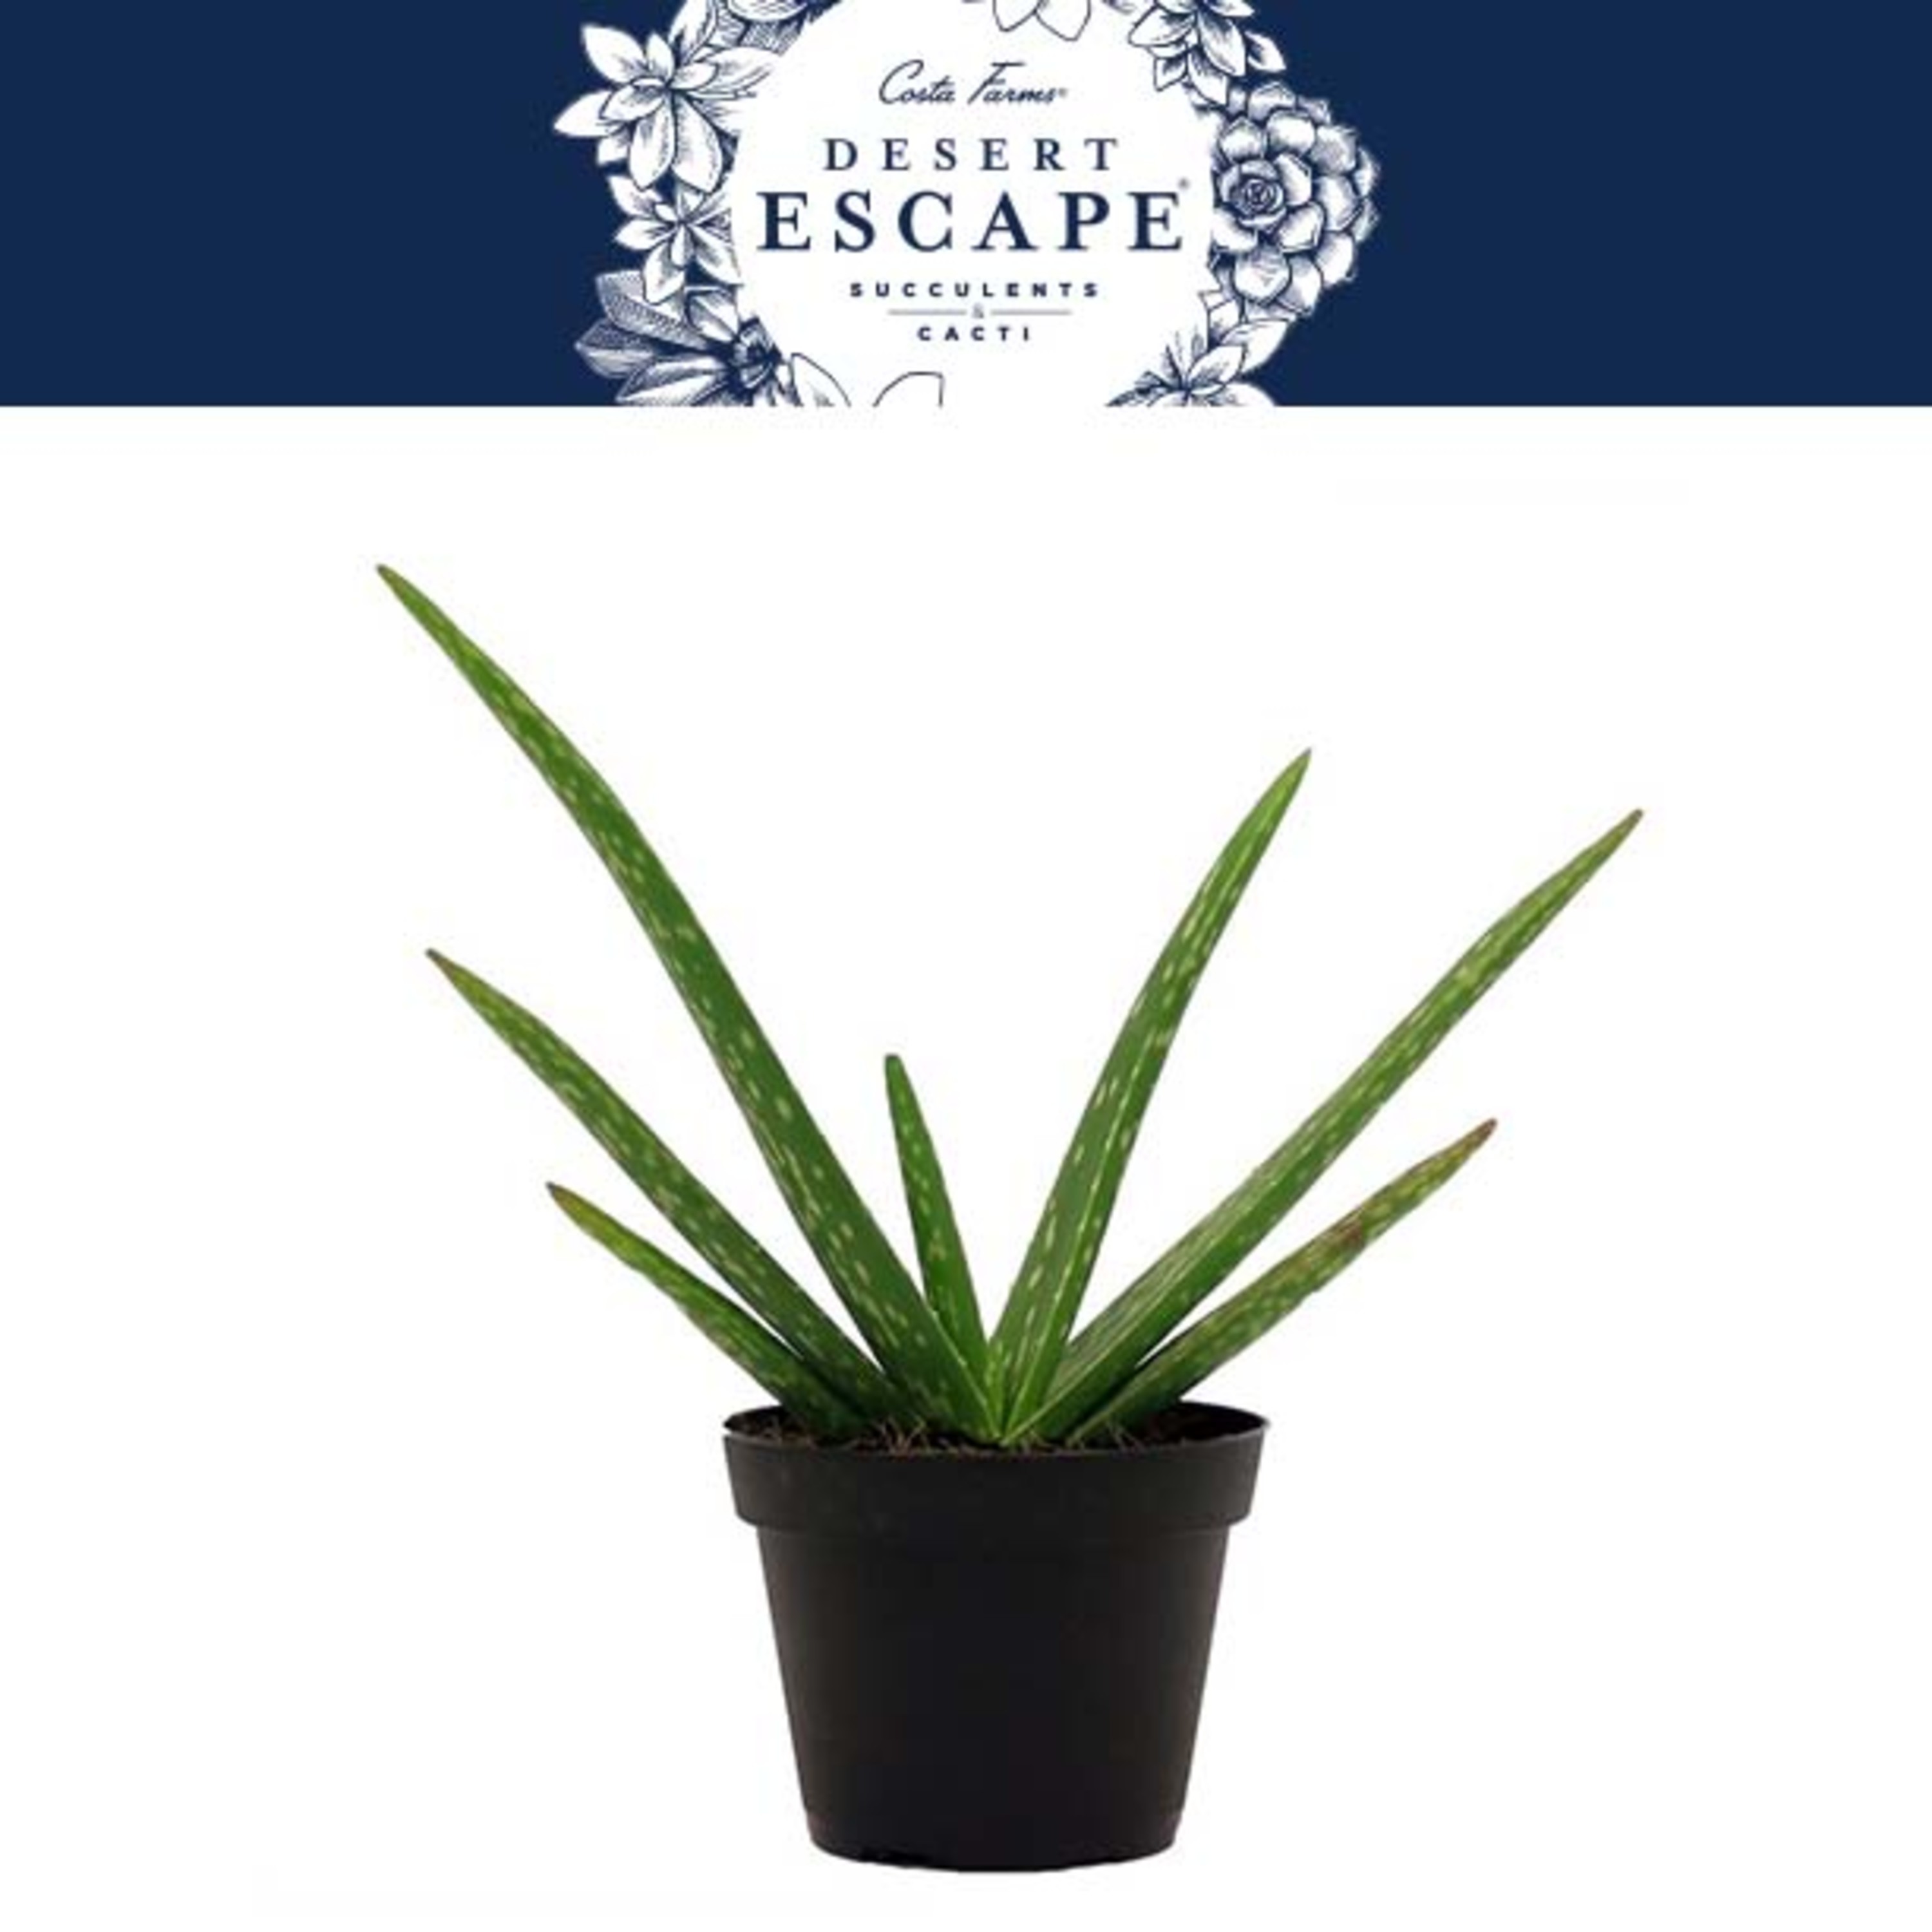 Costa Farms Desert Escape Live Indoor 7in. Tall Green Aloe Vera; Bright, Direct Sunlight Plant in 4in. Grower Pot - image 3 of 11